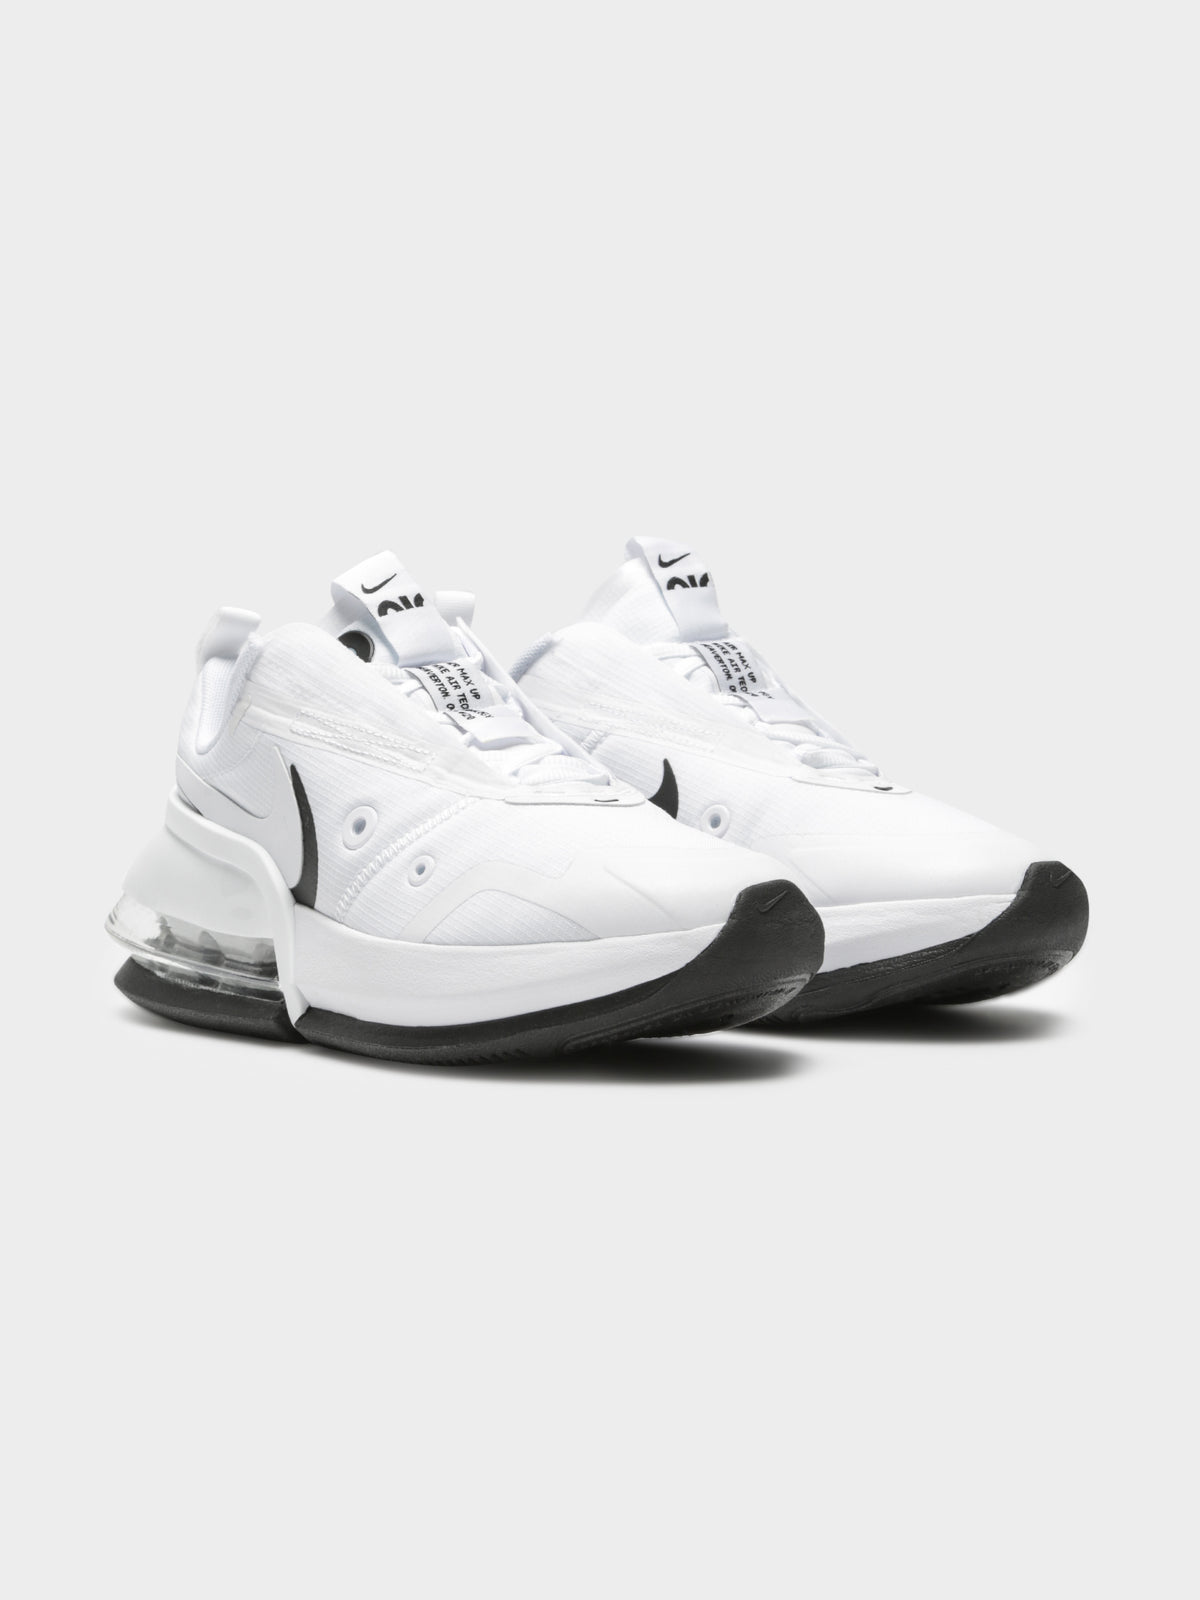 Air Max Up Sneakers in White